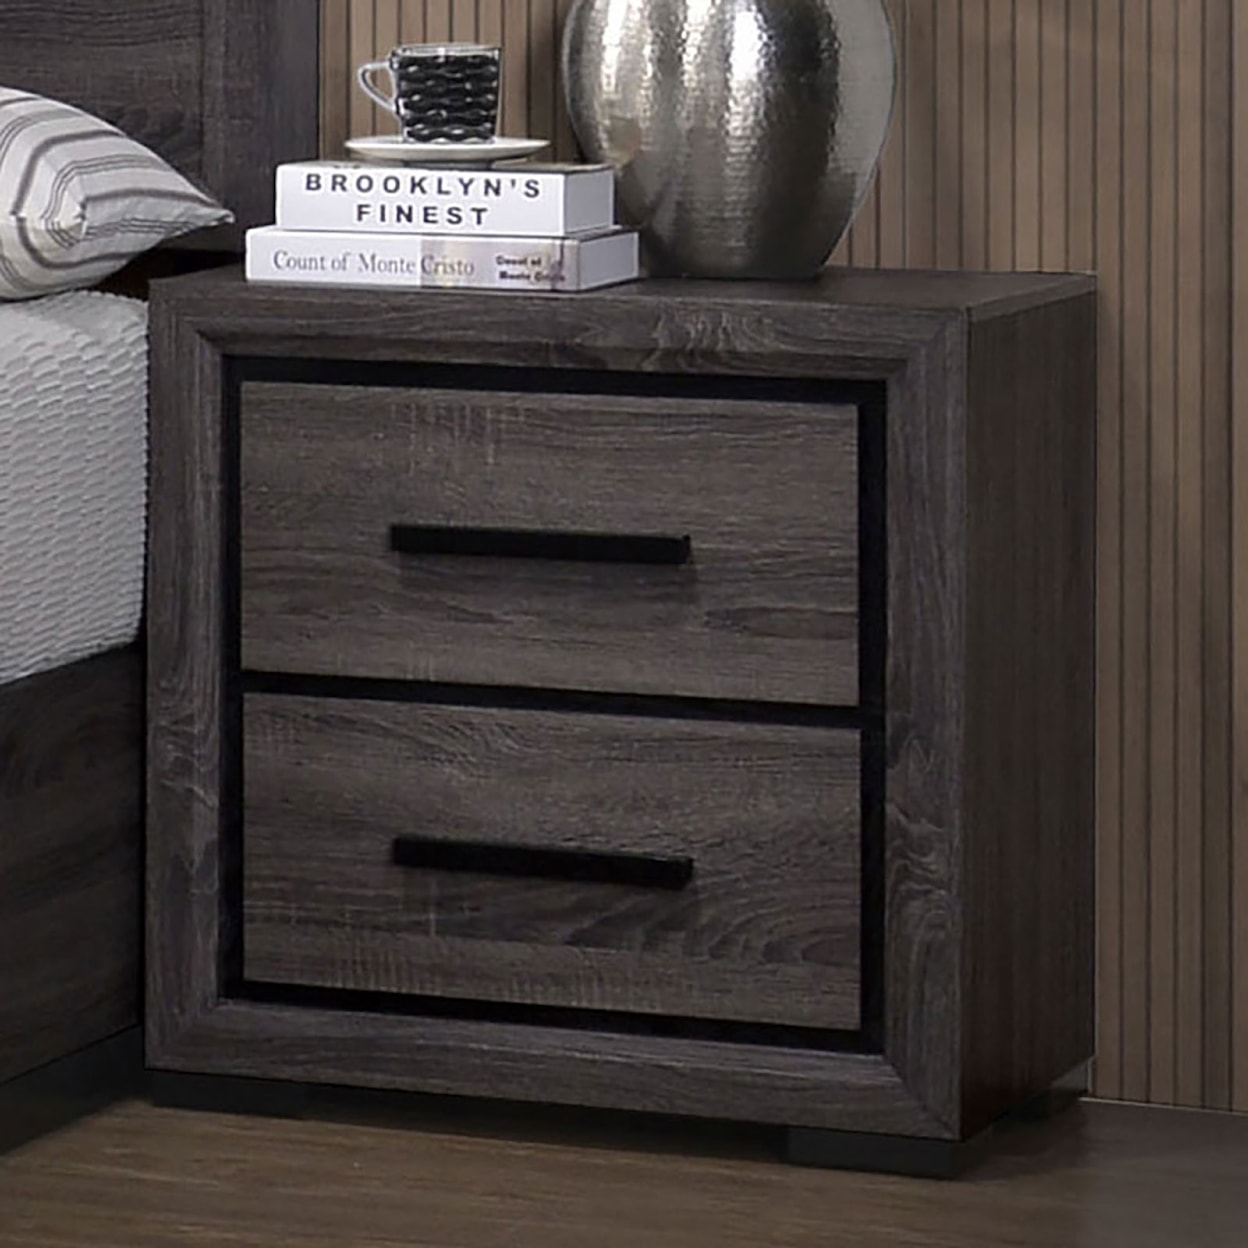 Furniture of America - FOA Conwy Nightstand